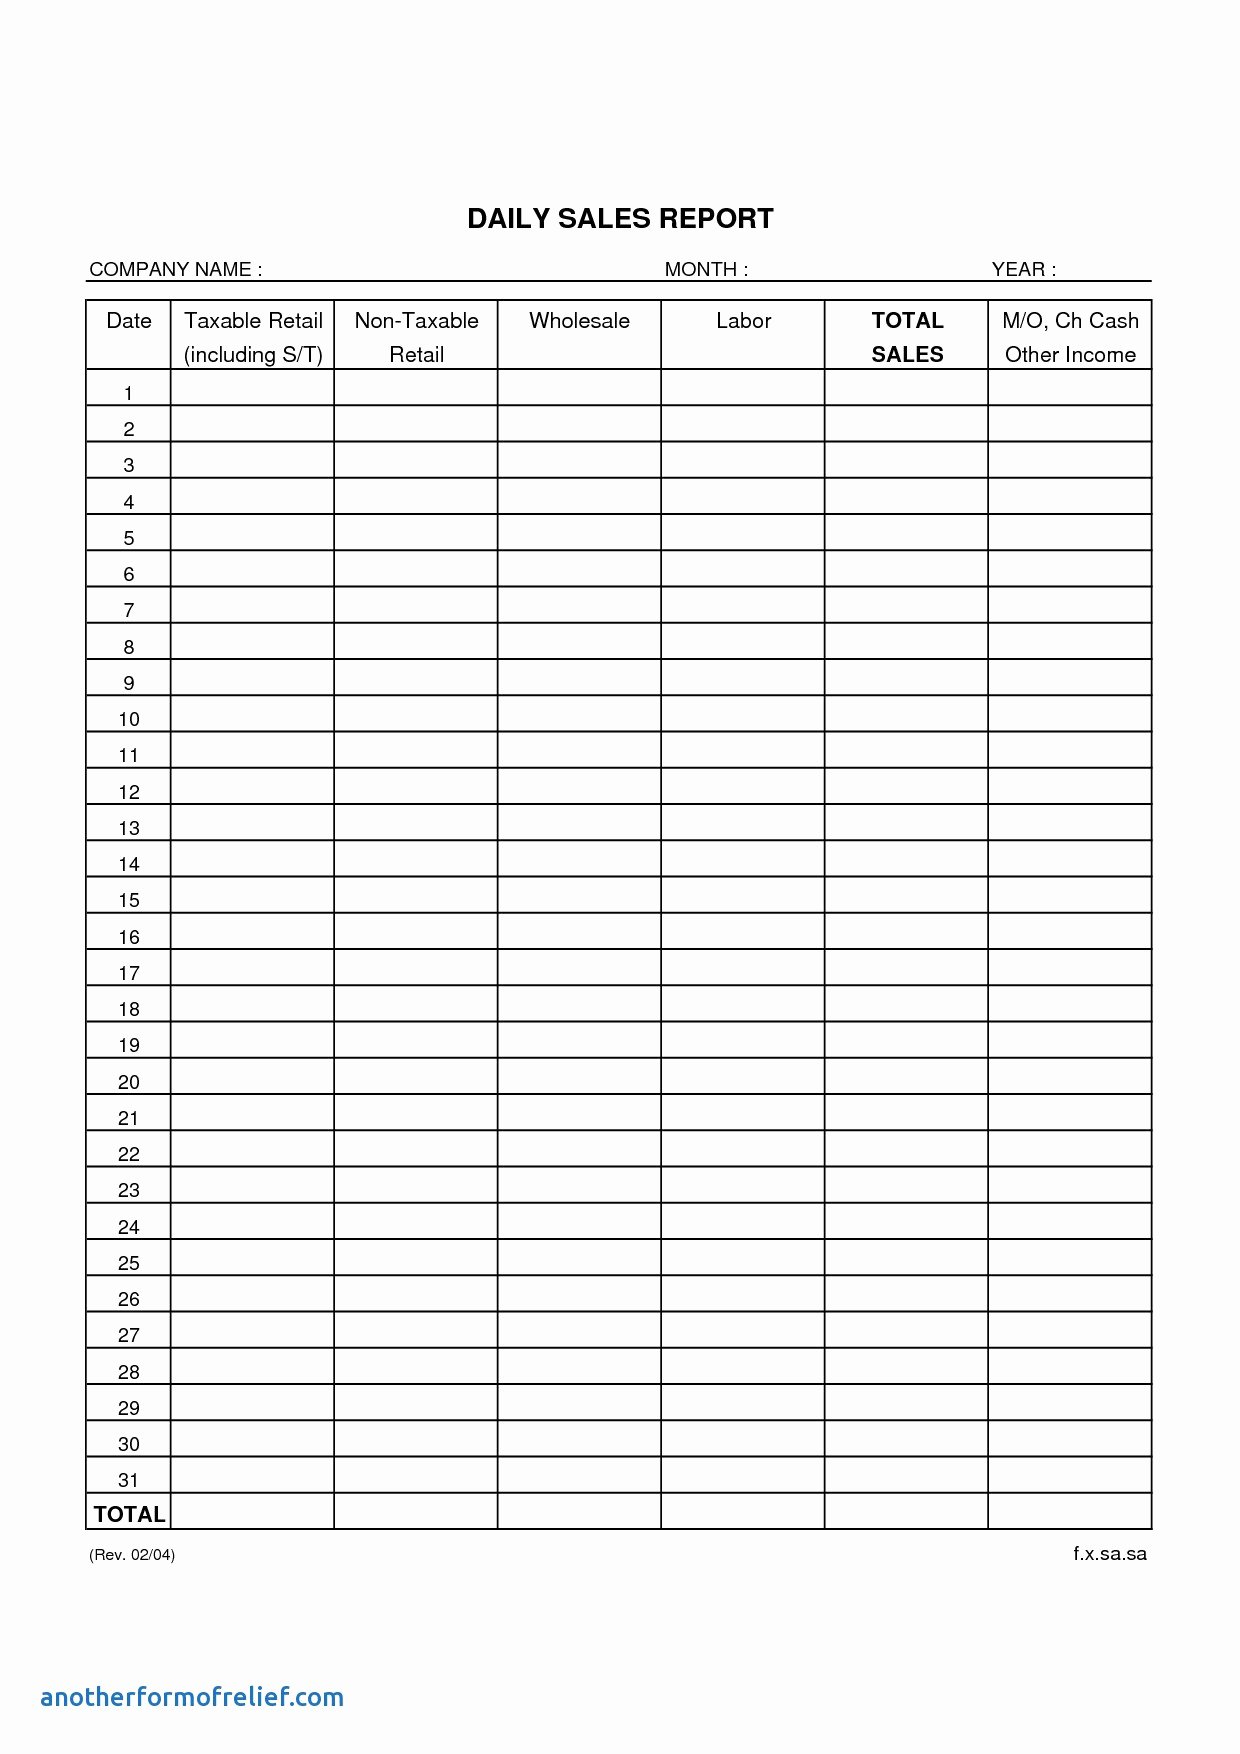 Sales Report Template Excel Beautiful Sales Analysis Report Example Dy Spreadsheet Performance